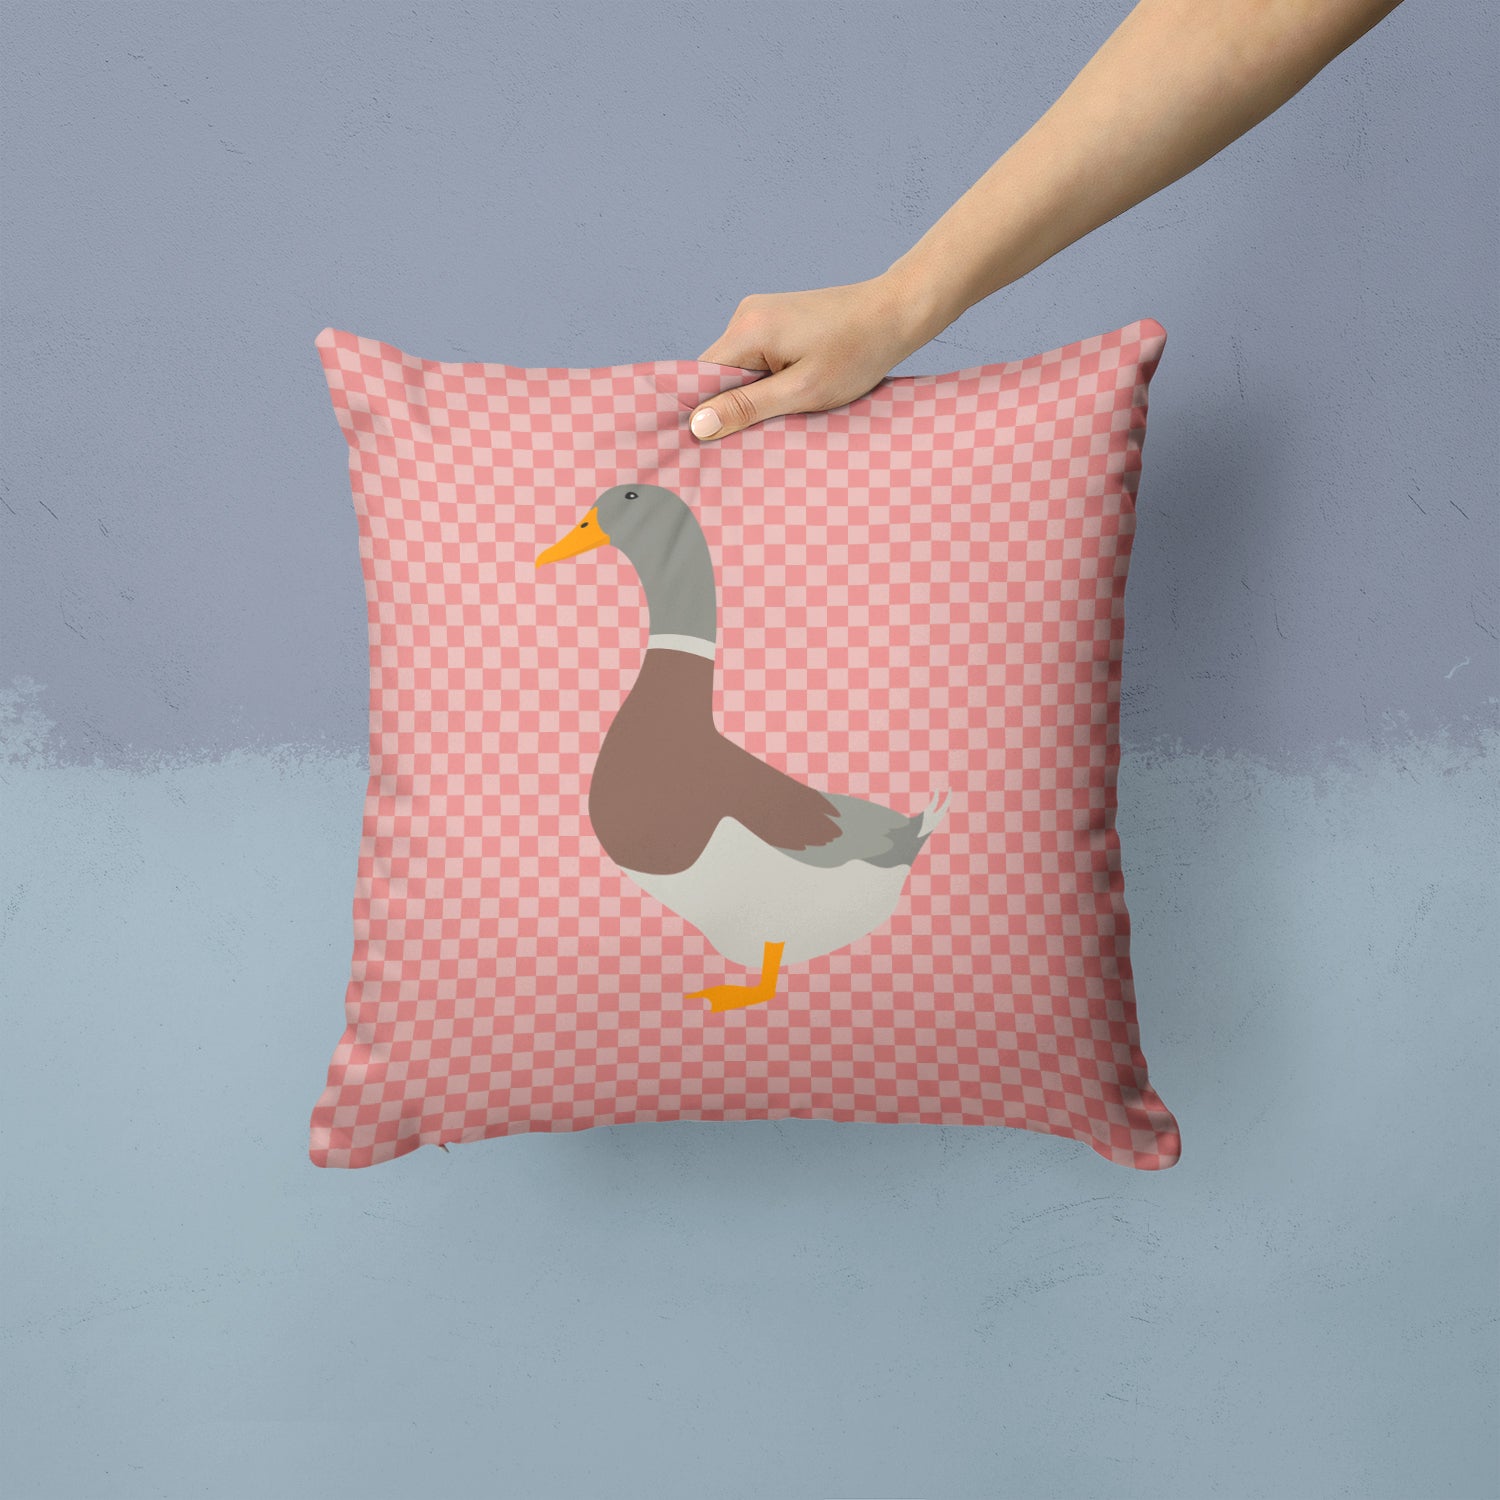 Saxony Sachsenente Duck Pink Check Fabric Decorative Pillow BB7863PW1414 - the-store.com